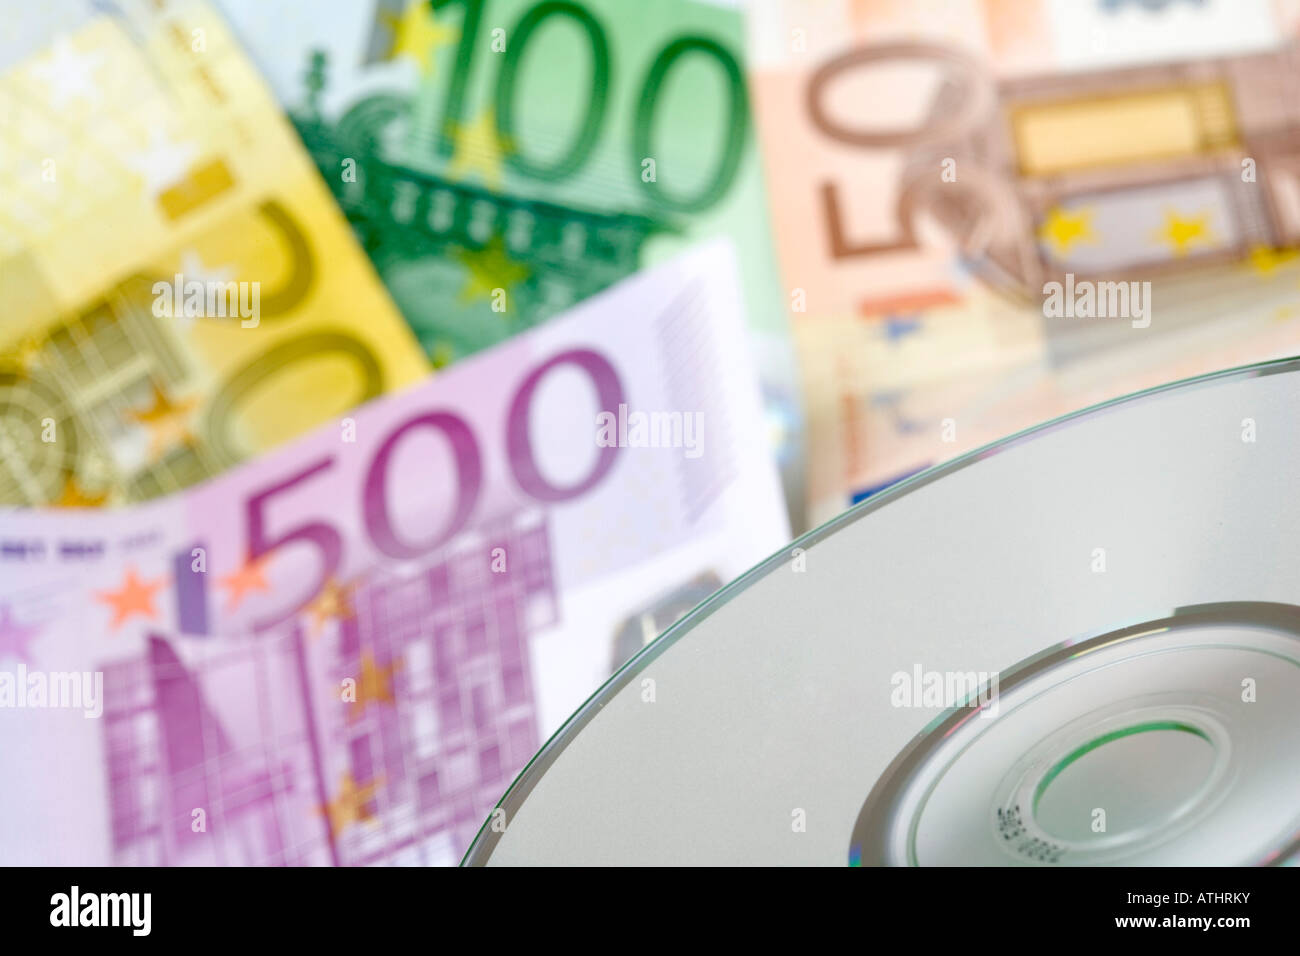 Compact Disc in front of Euro banknotes Stock Photo